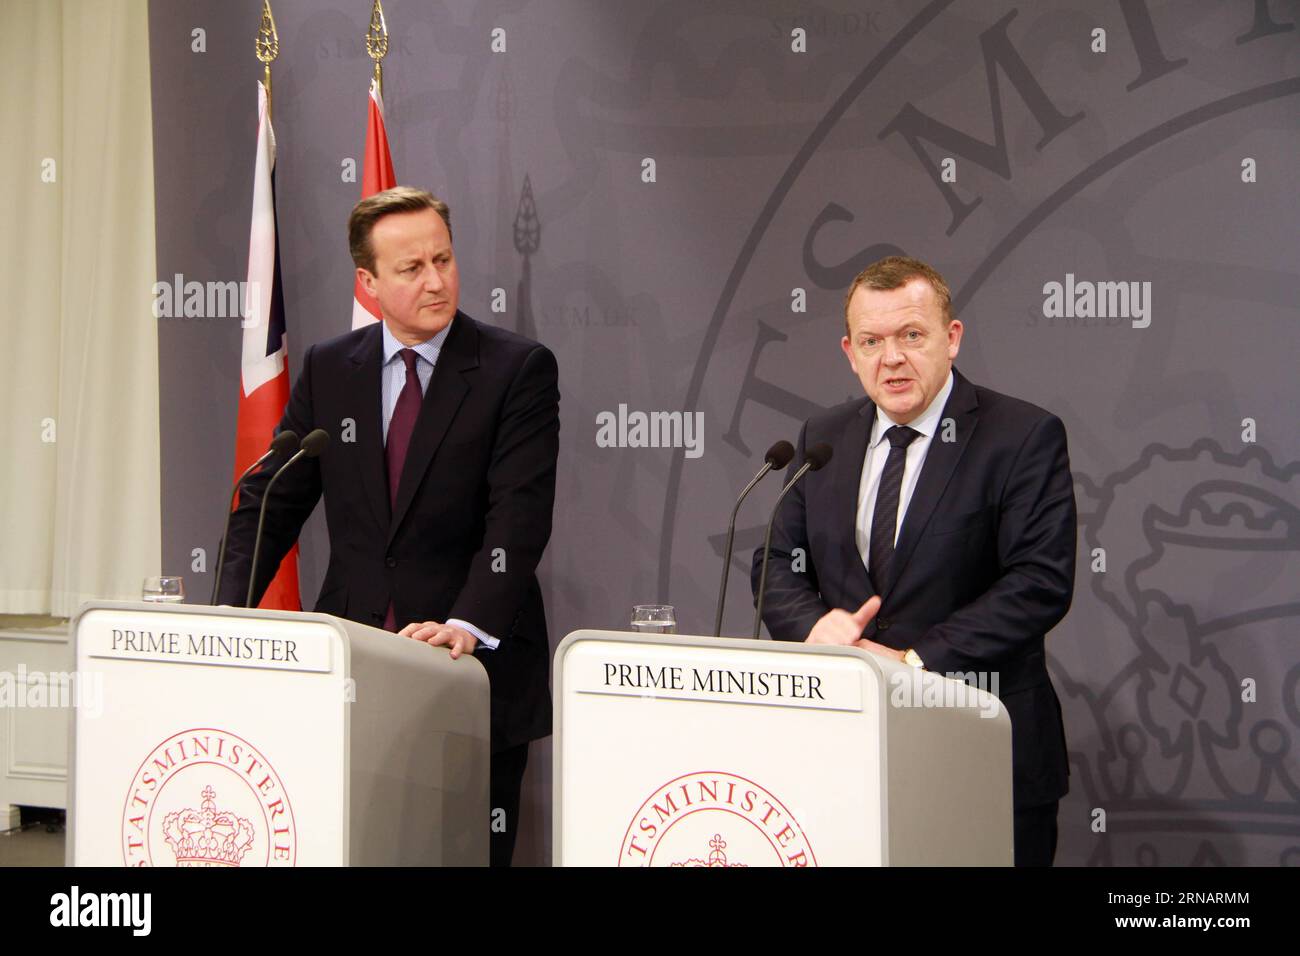 Danish Prime Minister Lars Loekke Rasmussen (R)and British Prime Minister David Cameron attend a press conference after their meeting in Copenhagen, Denmark, on Feb. 5, 2016. Danish Prime Minister Lars Loekke Rasmussen said here on Friday that he stood behind his British counterpart David Cameron s reform proposals aimed at keeping Britain in the European Union (EU). ) DENMARK-COPENHAGEN-BRITAIN-PM-MEETING ShixShouhe PUBLICATIONxNOTxINxCHN   Danish Prime Ministers Lars Loekke Rasmussen r and British Prime Ministers David Cameron attend a Press Conference After their Meeting in Copenhagen Denma Stock Photo